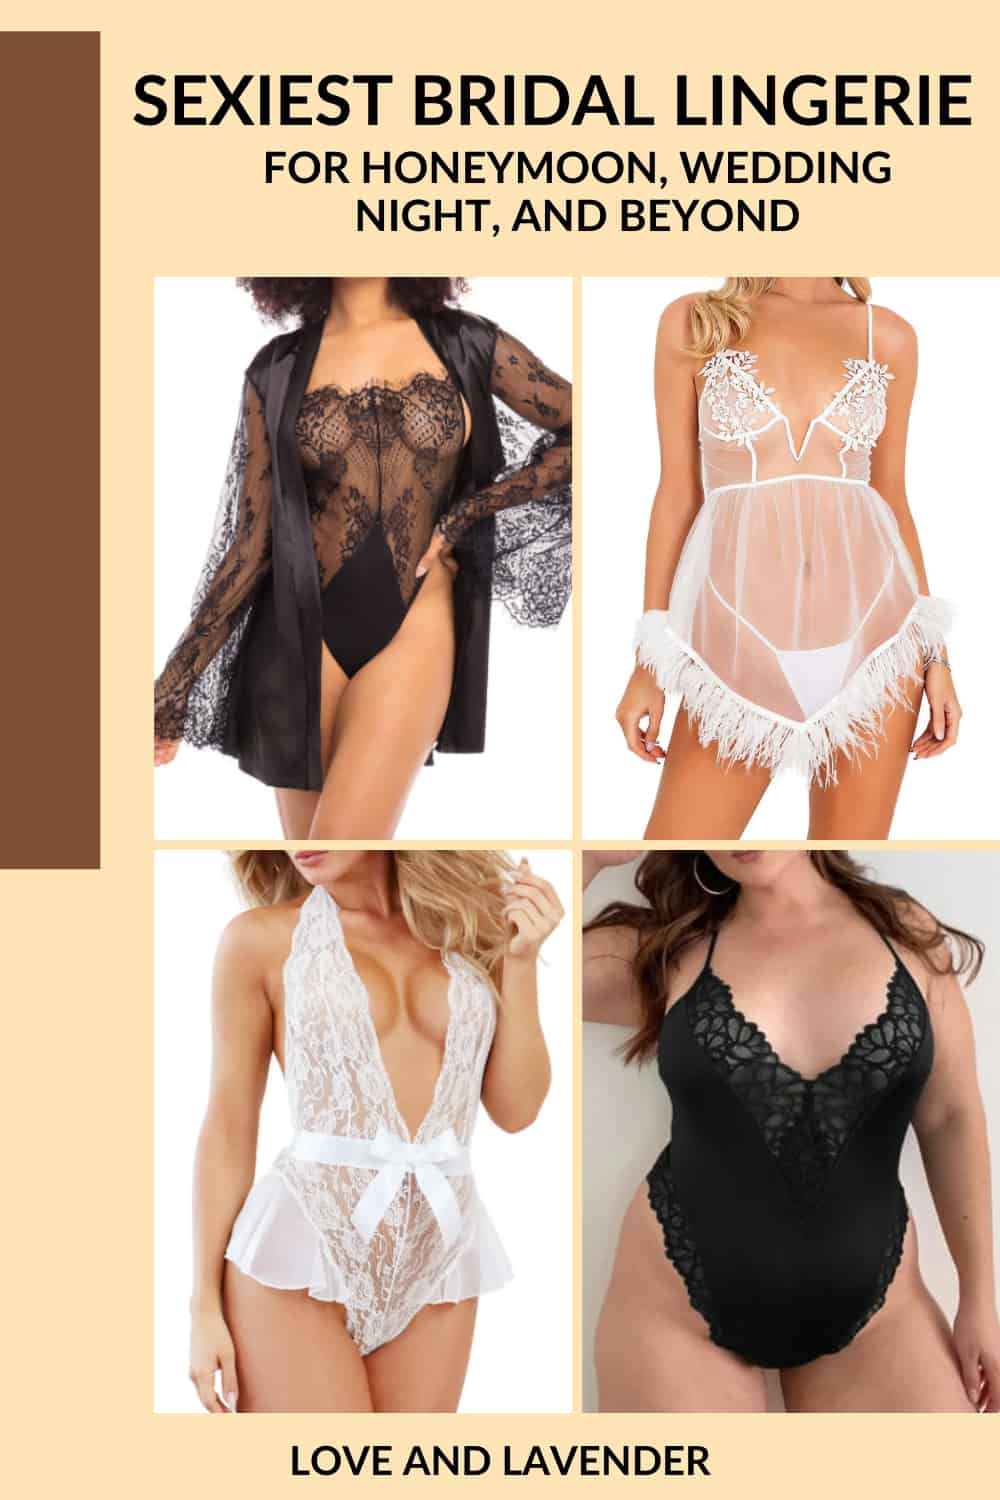 Guide to Choosing the Right Bridal Lingerie